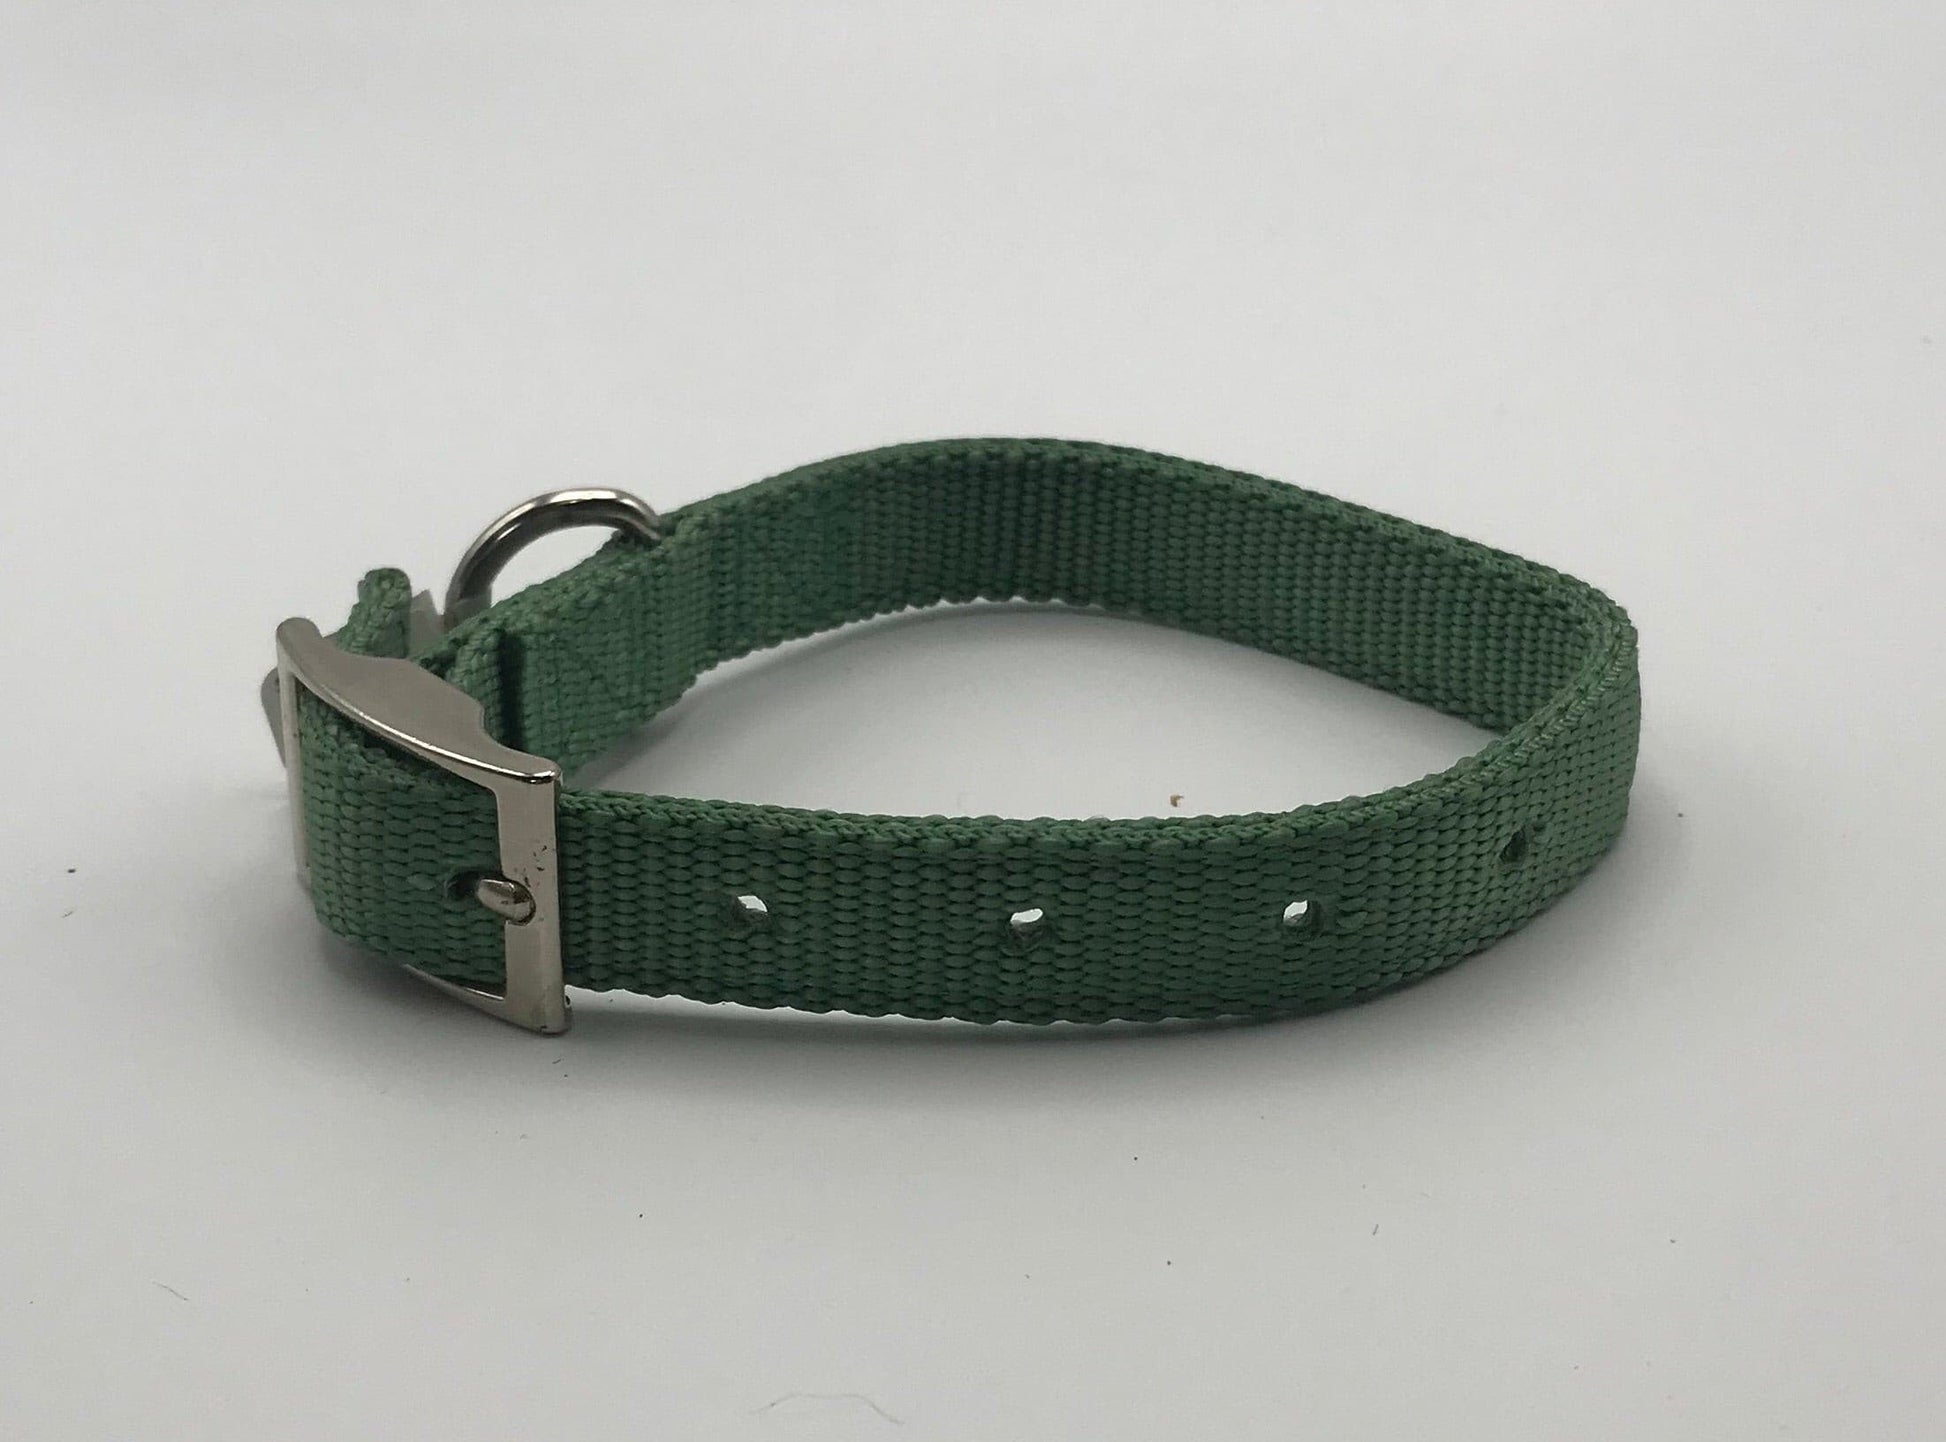 Lt. Green Collar with buckle.